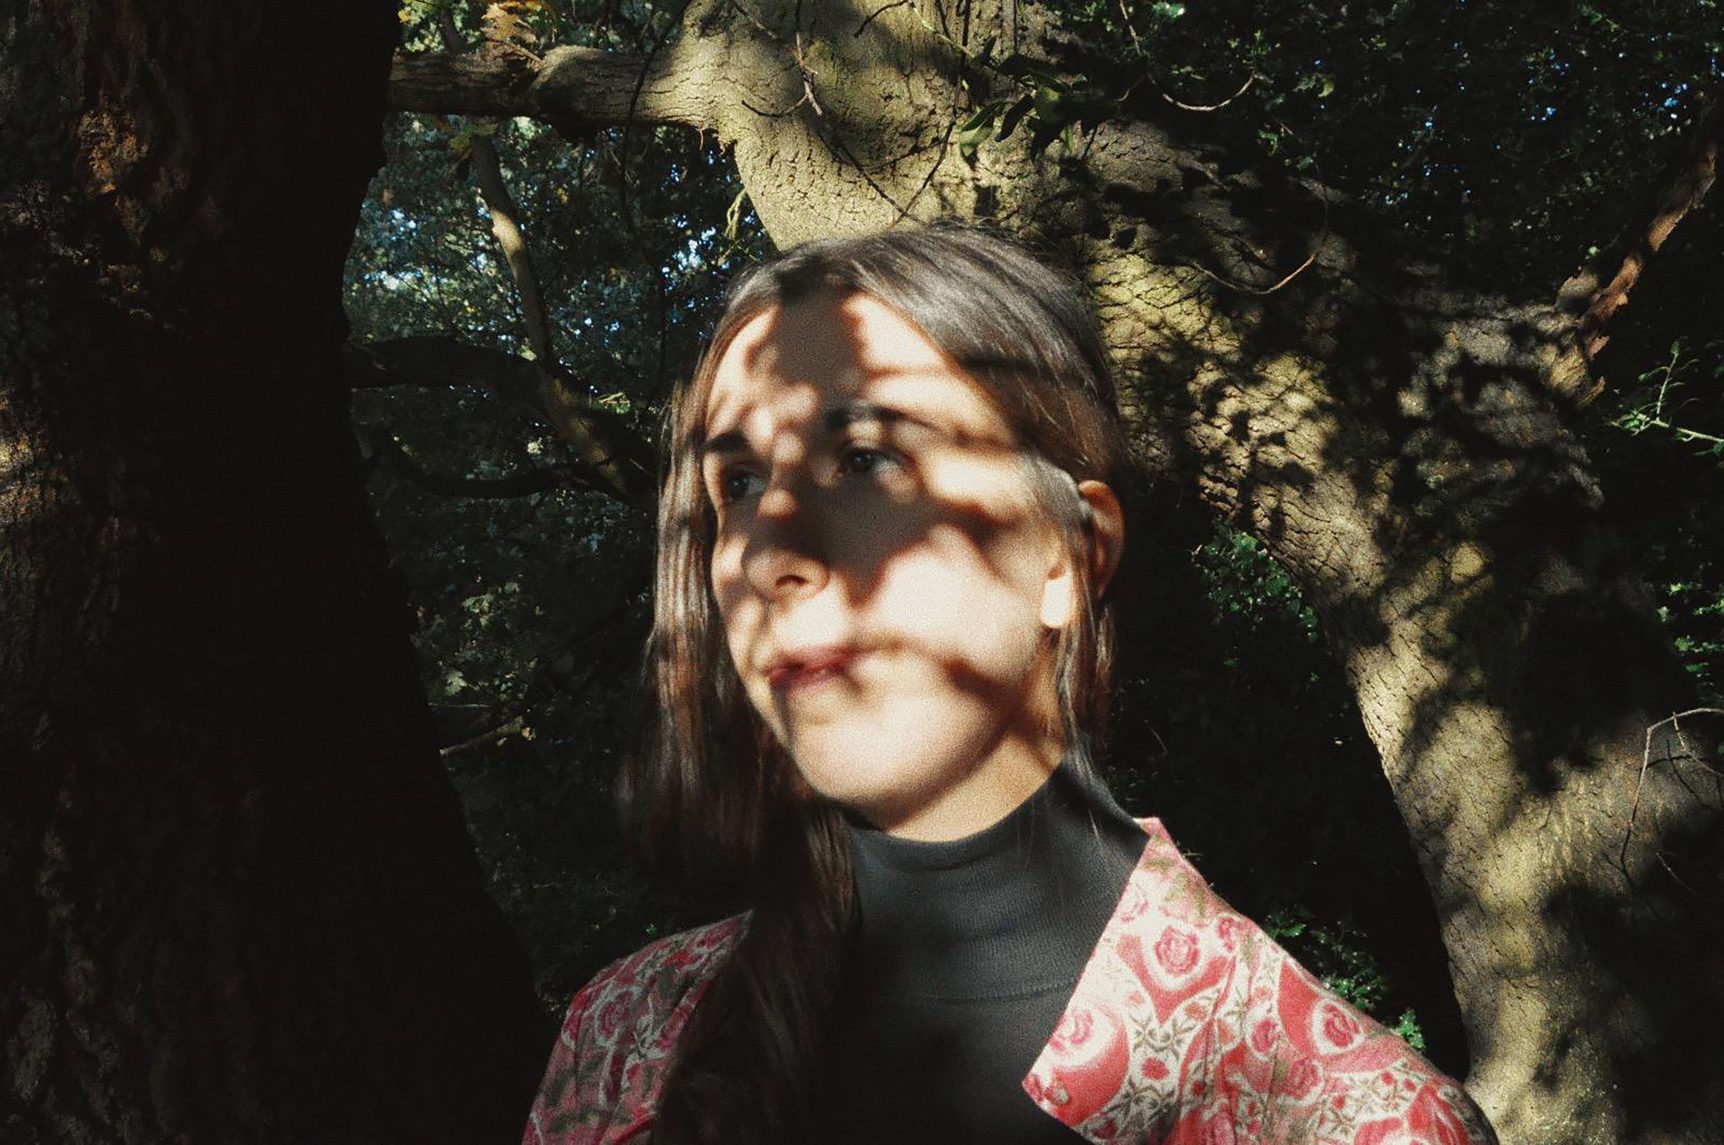 Headshot of Composer Ana Alves standing in front of trees with dappled sunlight on her face.